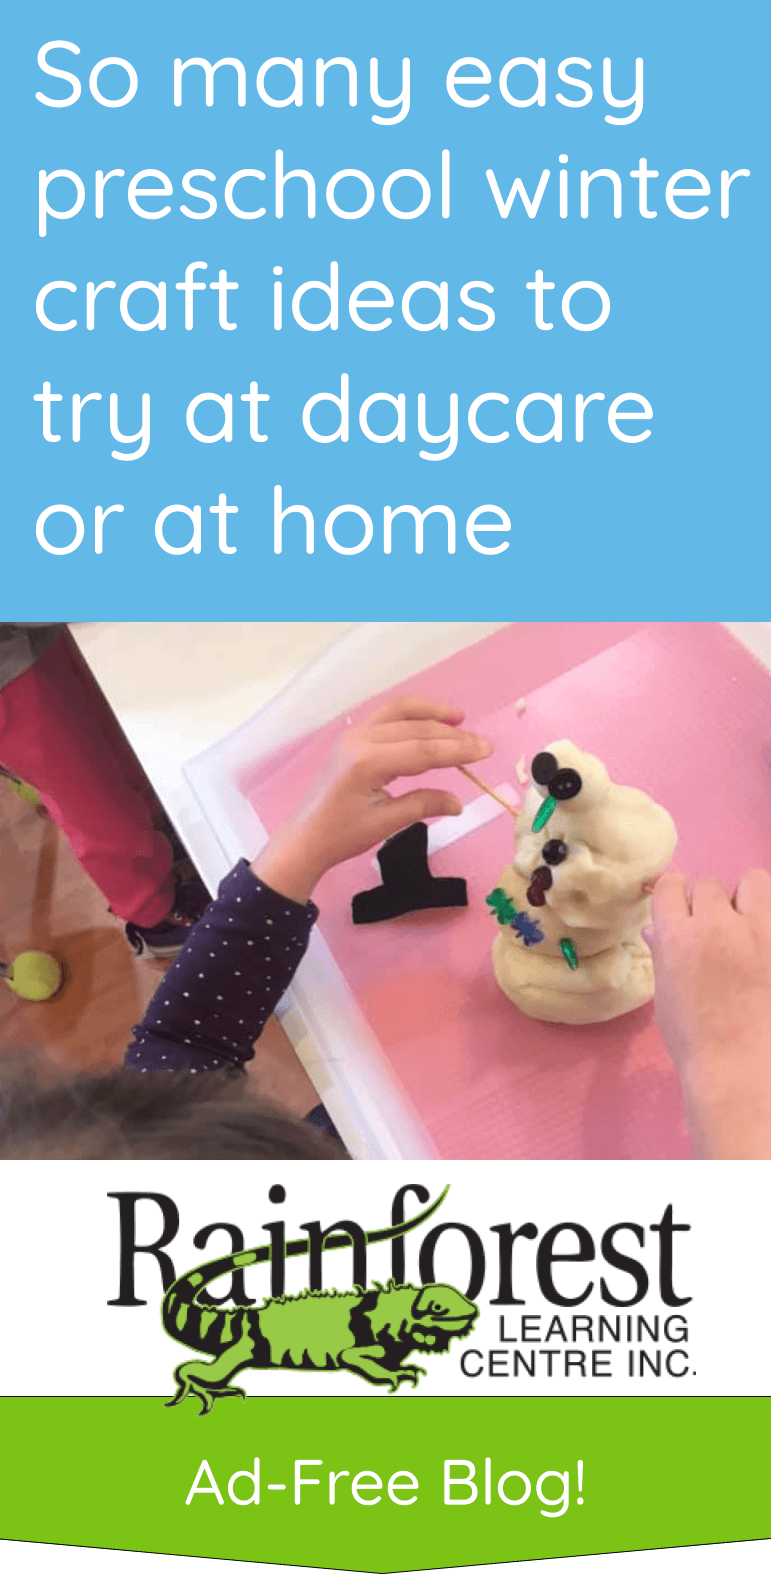 easy preschool winter craft ideas for daycare or home - article pinterest image